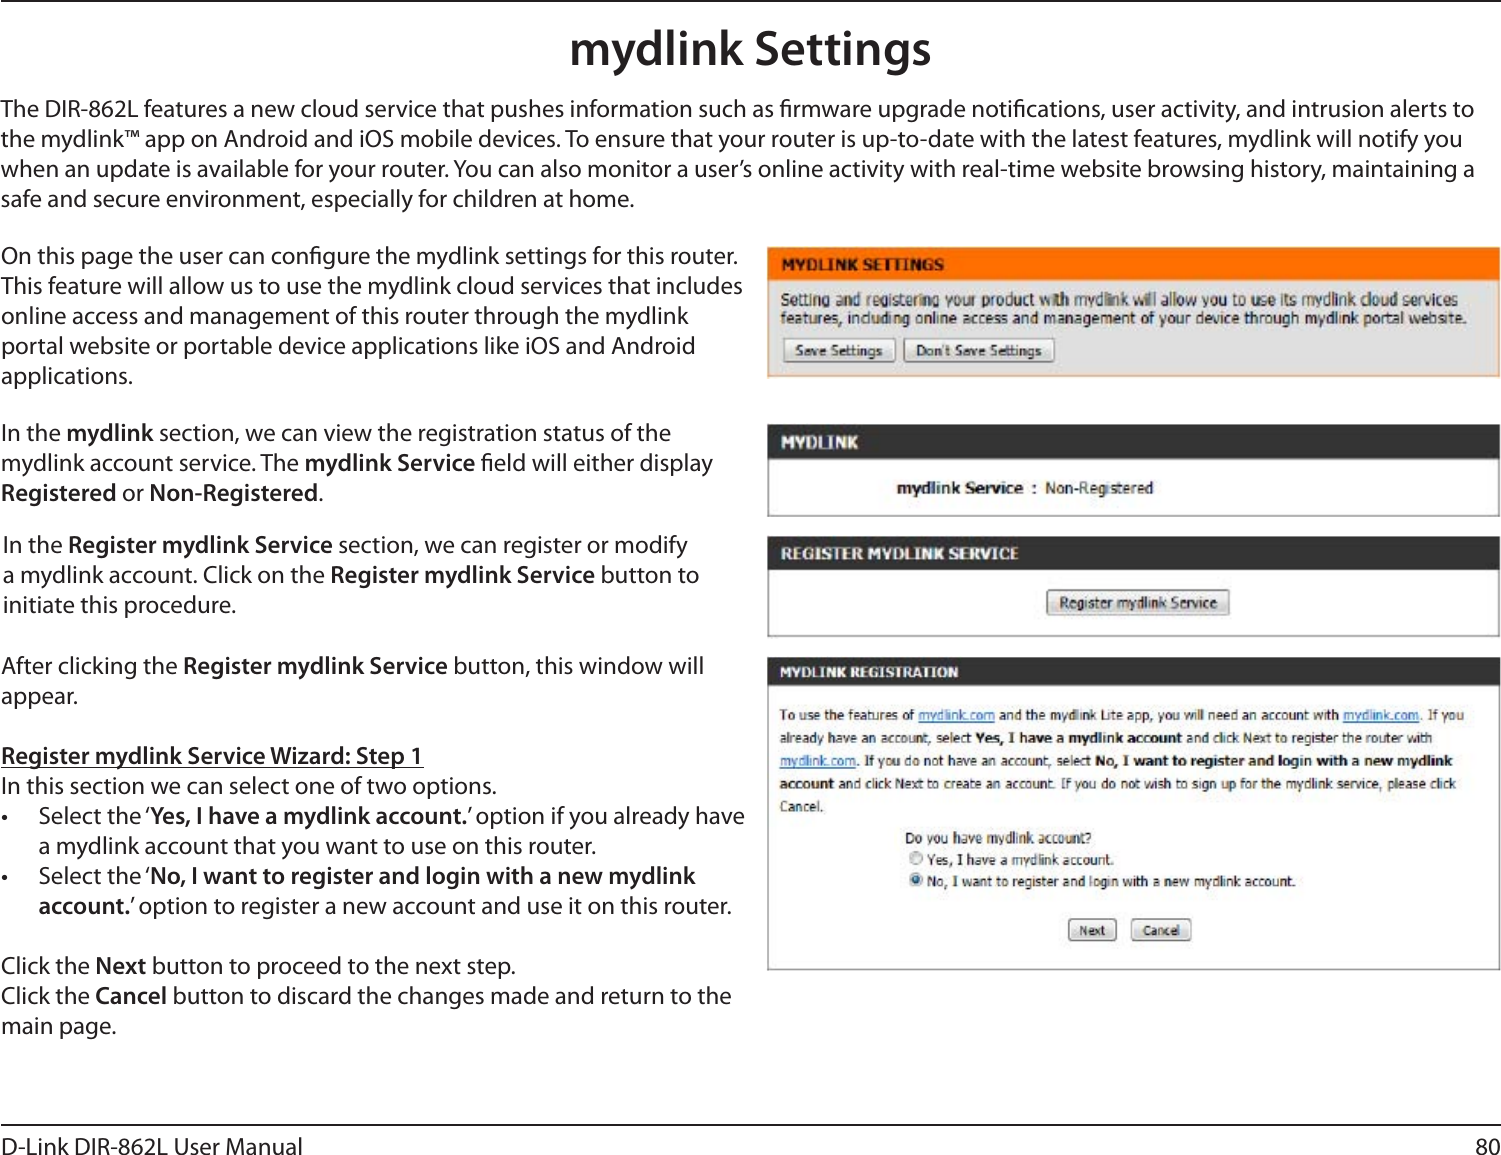 80D-Link DIR-862L User Manualmydlink SettingsOn this page the user can congure the mydlink settings for this router. This feature will allow us to use the mydlink cloud services that includes online access and management of this router through the mydlink portal website or portable device applications like iOS and Android applications.In the mydlink section, we can view the registration status of the mydlink account service. The mydlink Service eld will either display Registered or Non-Registered.In the Register mydlink Service section, we can register or modify a mydlink account. Click on the Register mydlink Service button to initiate this procedure.After clicking the Register mydlink Service button, this window will appear.Register mydlink Service Wizard: Step 1In this section we can select one of two options.•  Select the ‘Yes, I have a mydlink account.’ option if you already have a mydlink account that you want to use on this router. •  Select the ‘No, I want to register and login with a new mydlink account.’ option to register a new account and use it on this router.Click the Next button to proceed to the next step. Click the Cancel button to discard the changes made and return to the main page.The DIR-862L features a new cloud service that pushes information such as rmware upgrade notications, user activity, and intrusion alerts to the mydlink™ app on Android and iOS mobile devices. To ensure that your router is up-to-date with the latest features, mydlink will notify you when an update is available for your router. You can also monitor a user’s online activity with real-time website browsing history, maintaining a safe and secure environment, especially for children at home.